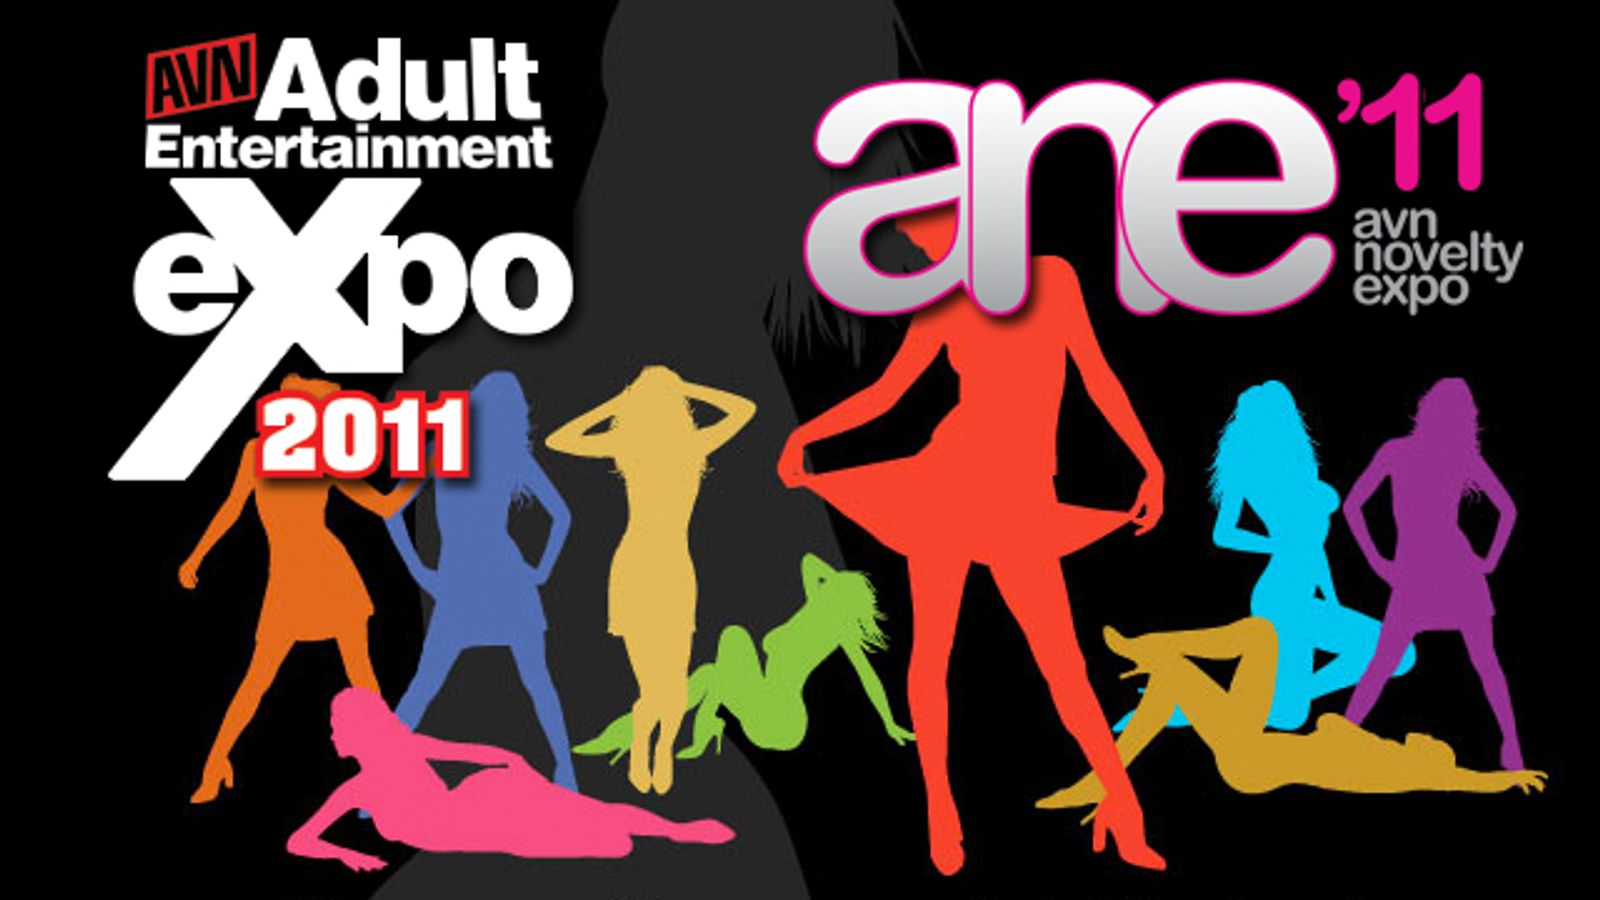 AVN Novelty Expo to Ring in New Year at 2011 AEE